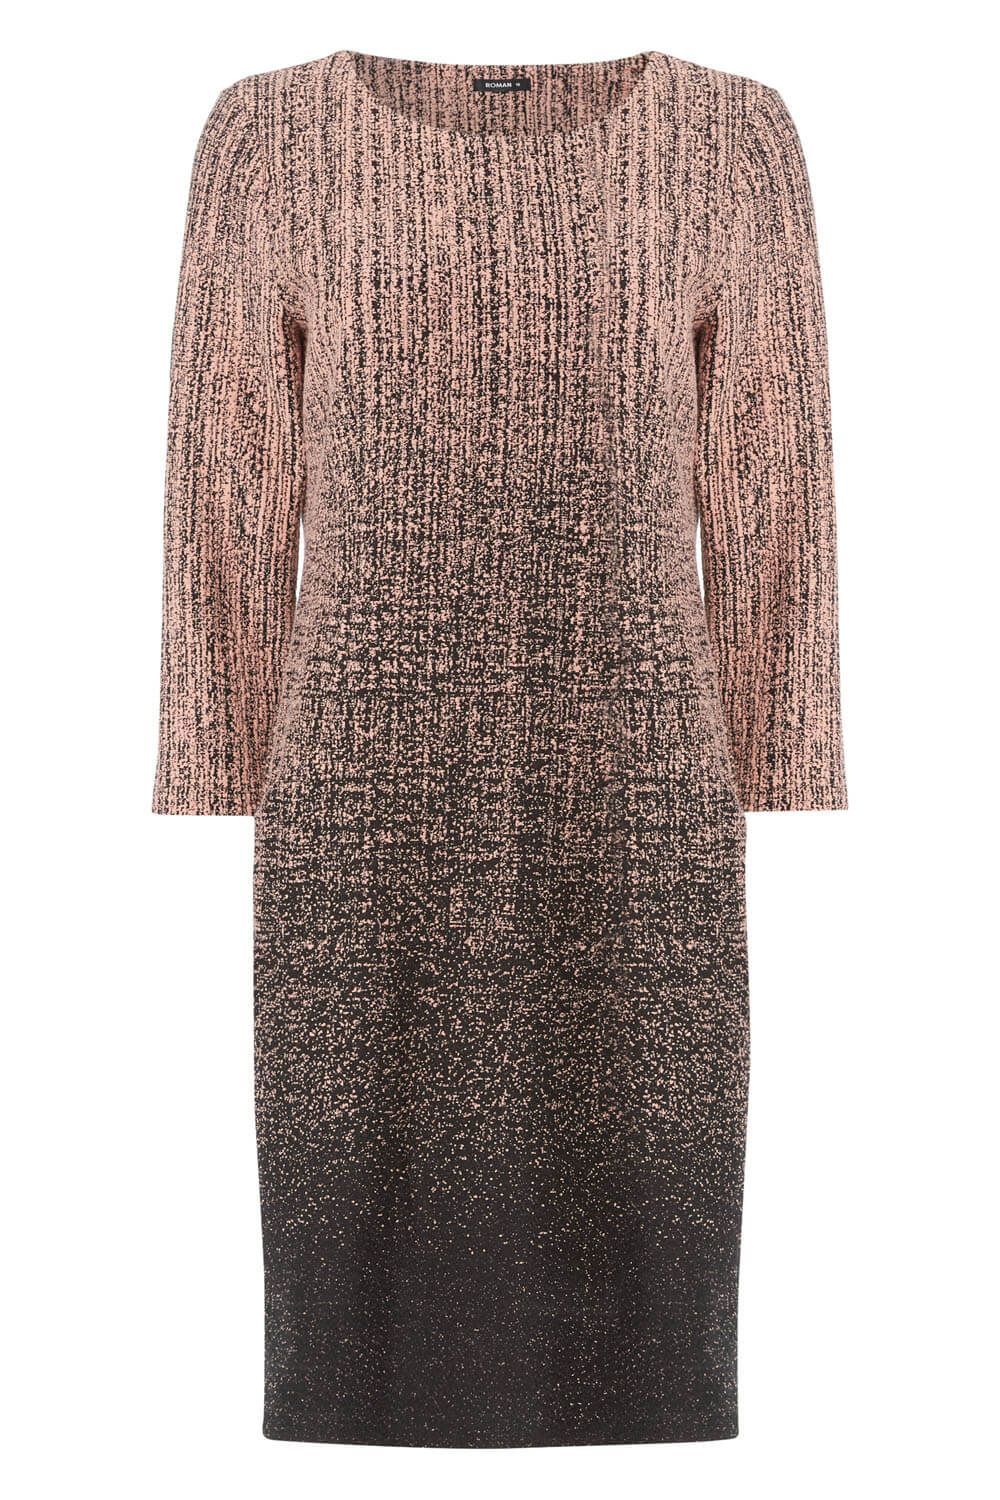 PINK Ombre Textured Shift Dress, Image 5 of 5